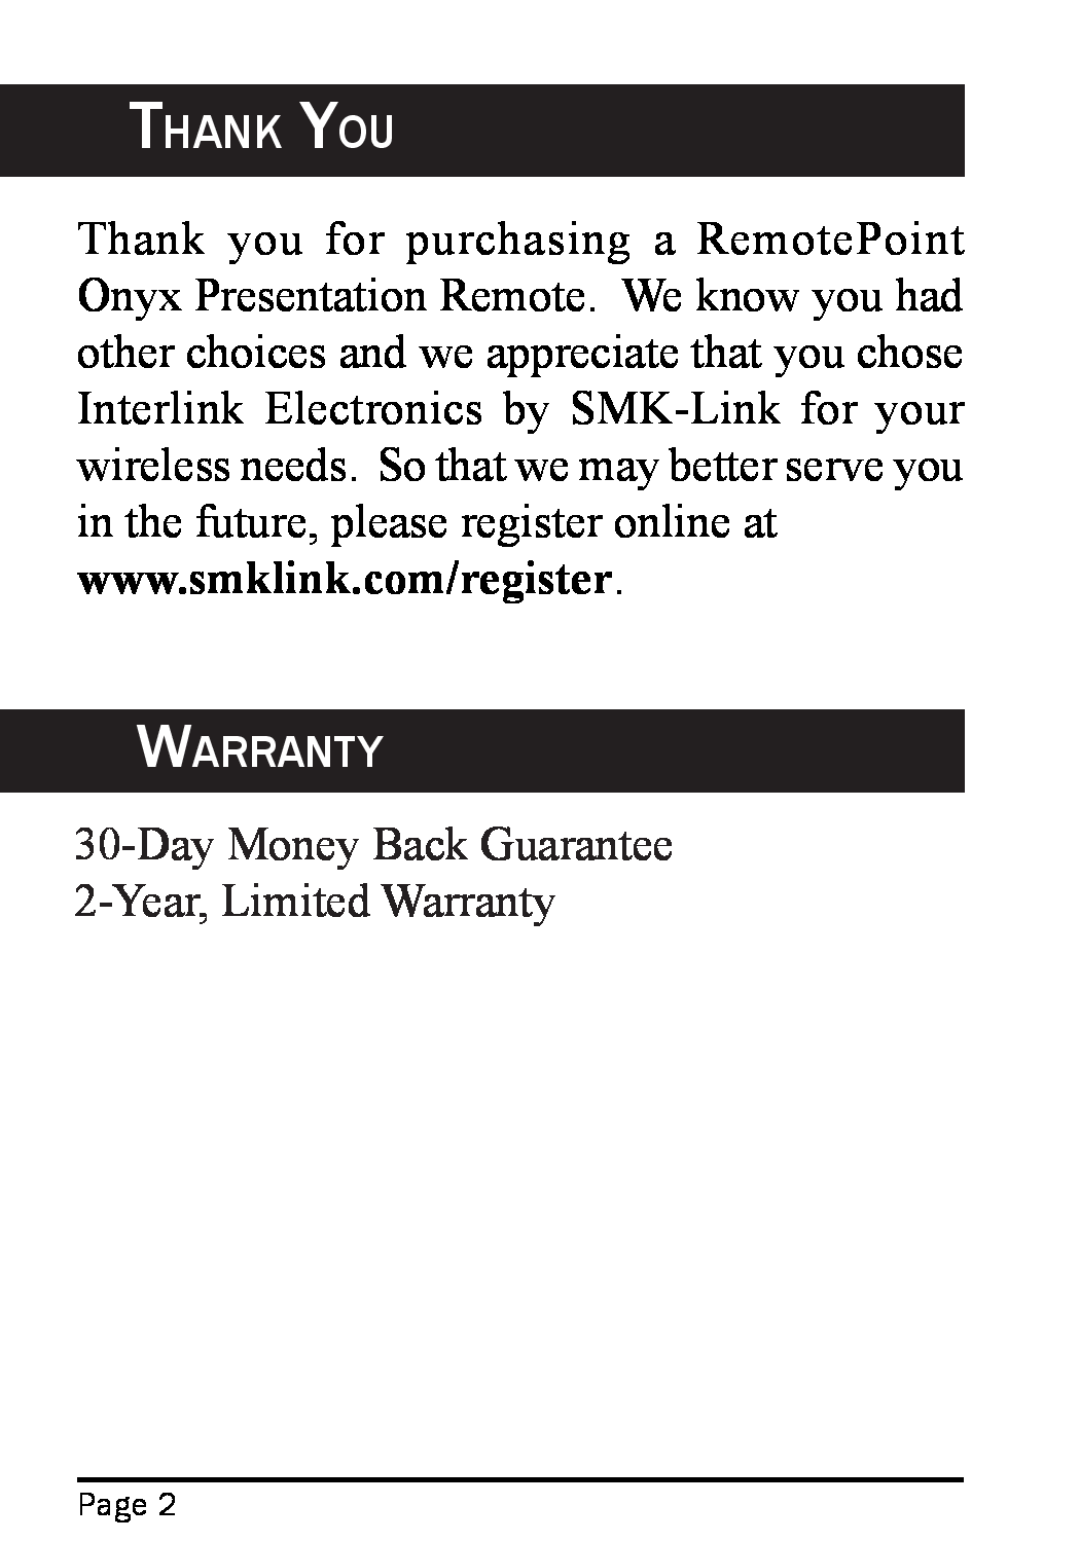 Interlink electronic 94-01441, RemotePoint Onyx Thank You, Day Money Back Guarantee 2-Year, Limited Warranty, Page 